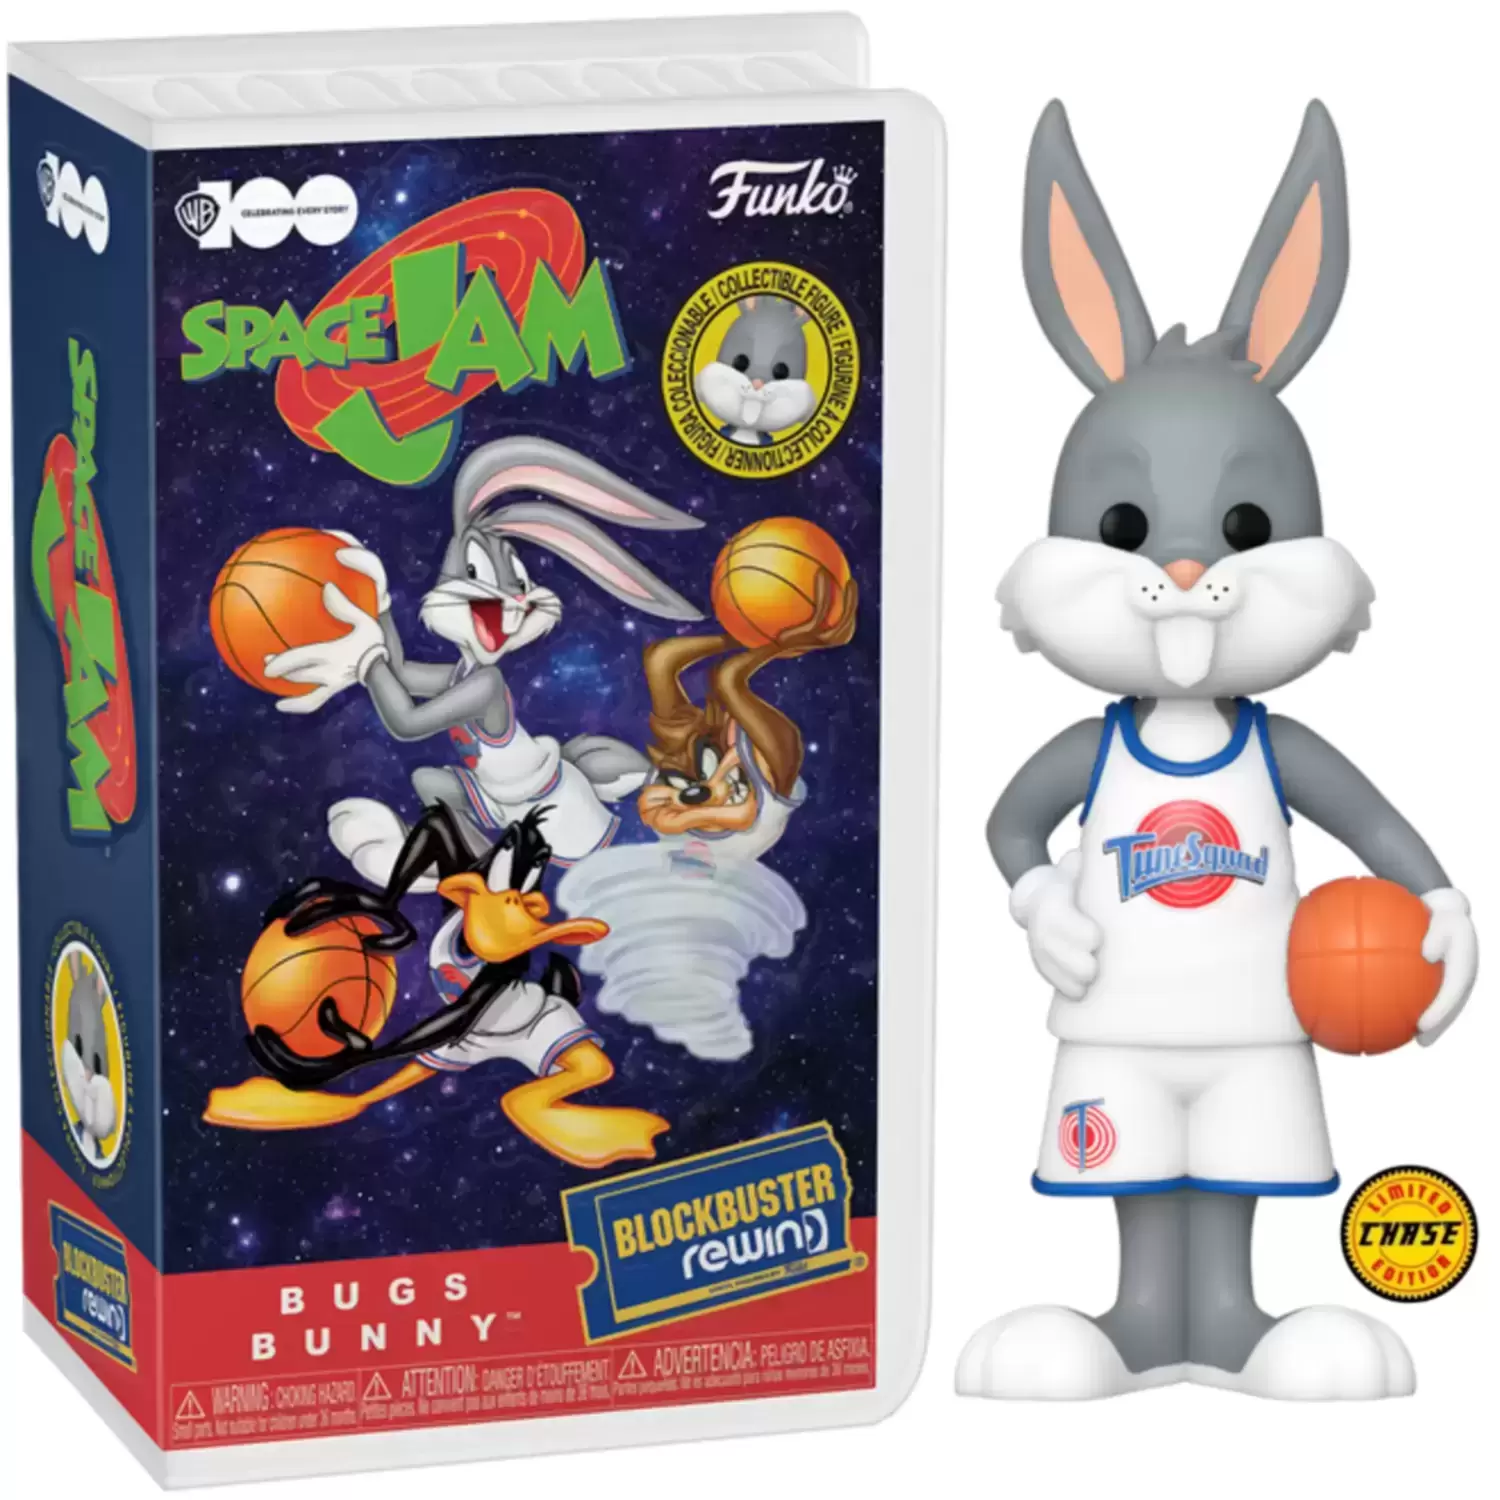 Blockbuster Rewind - Space Jam - Bugs Bunny Chase